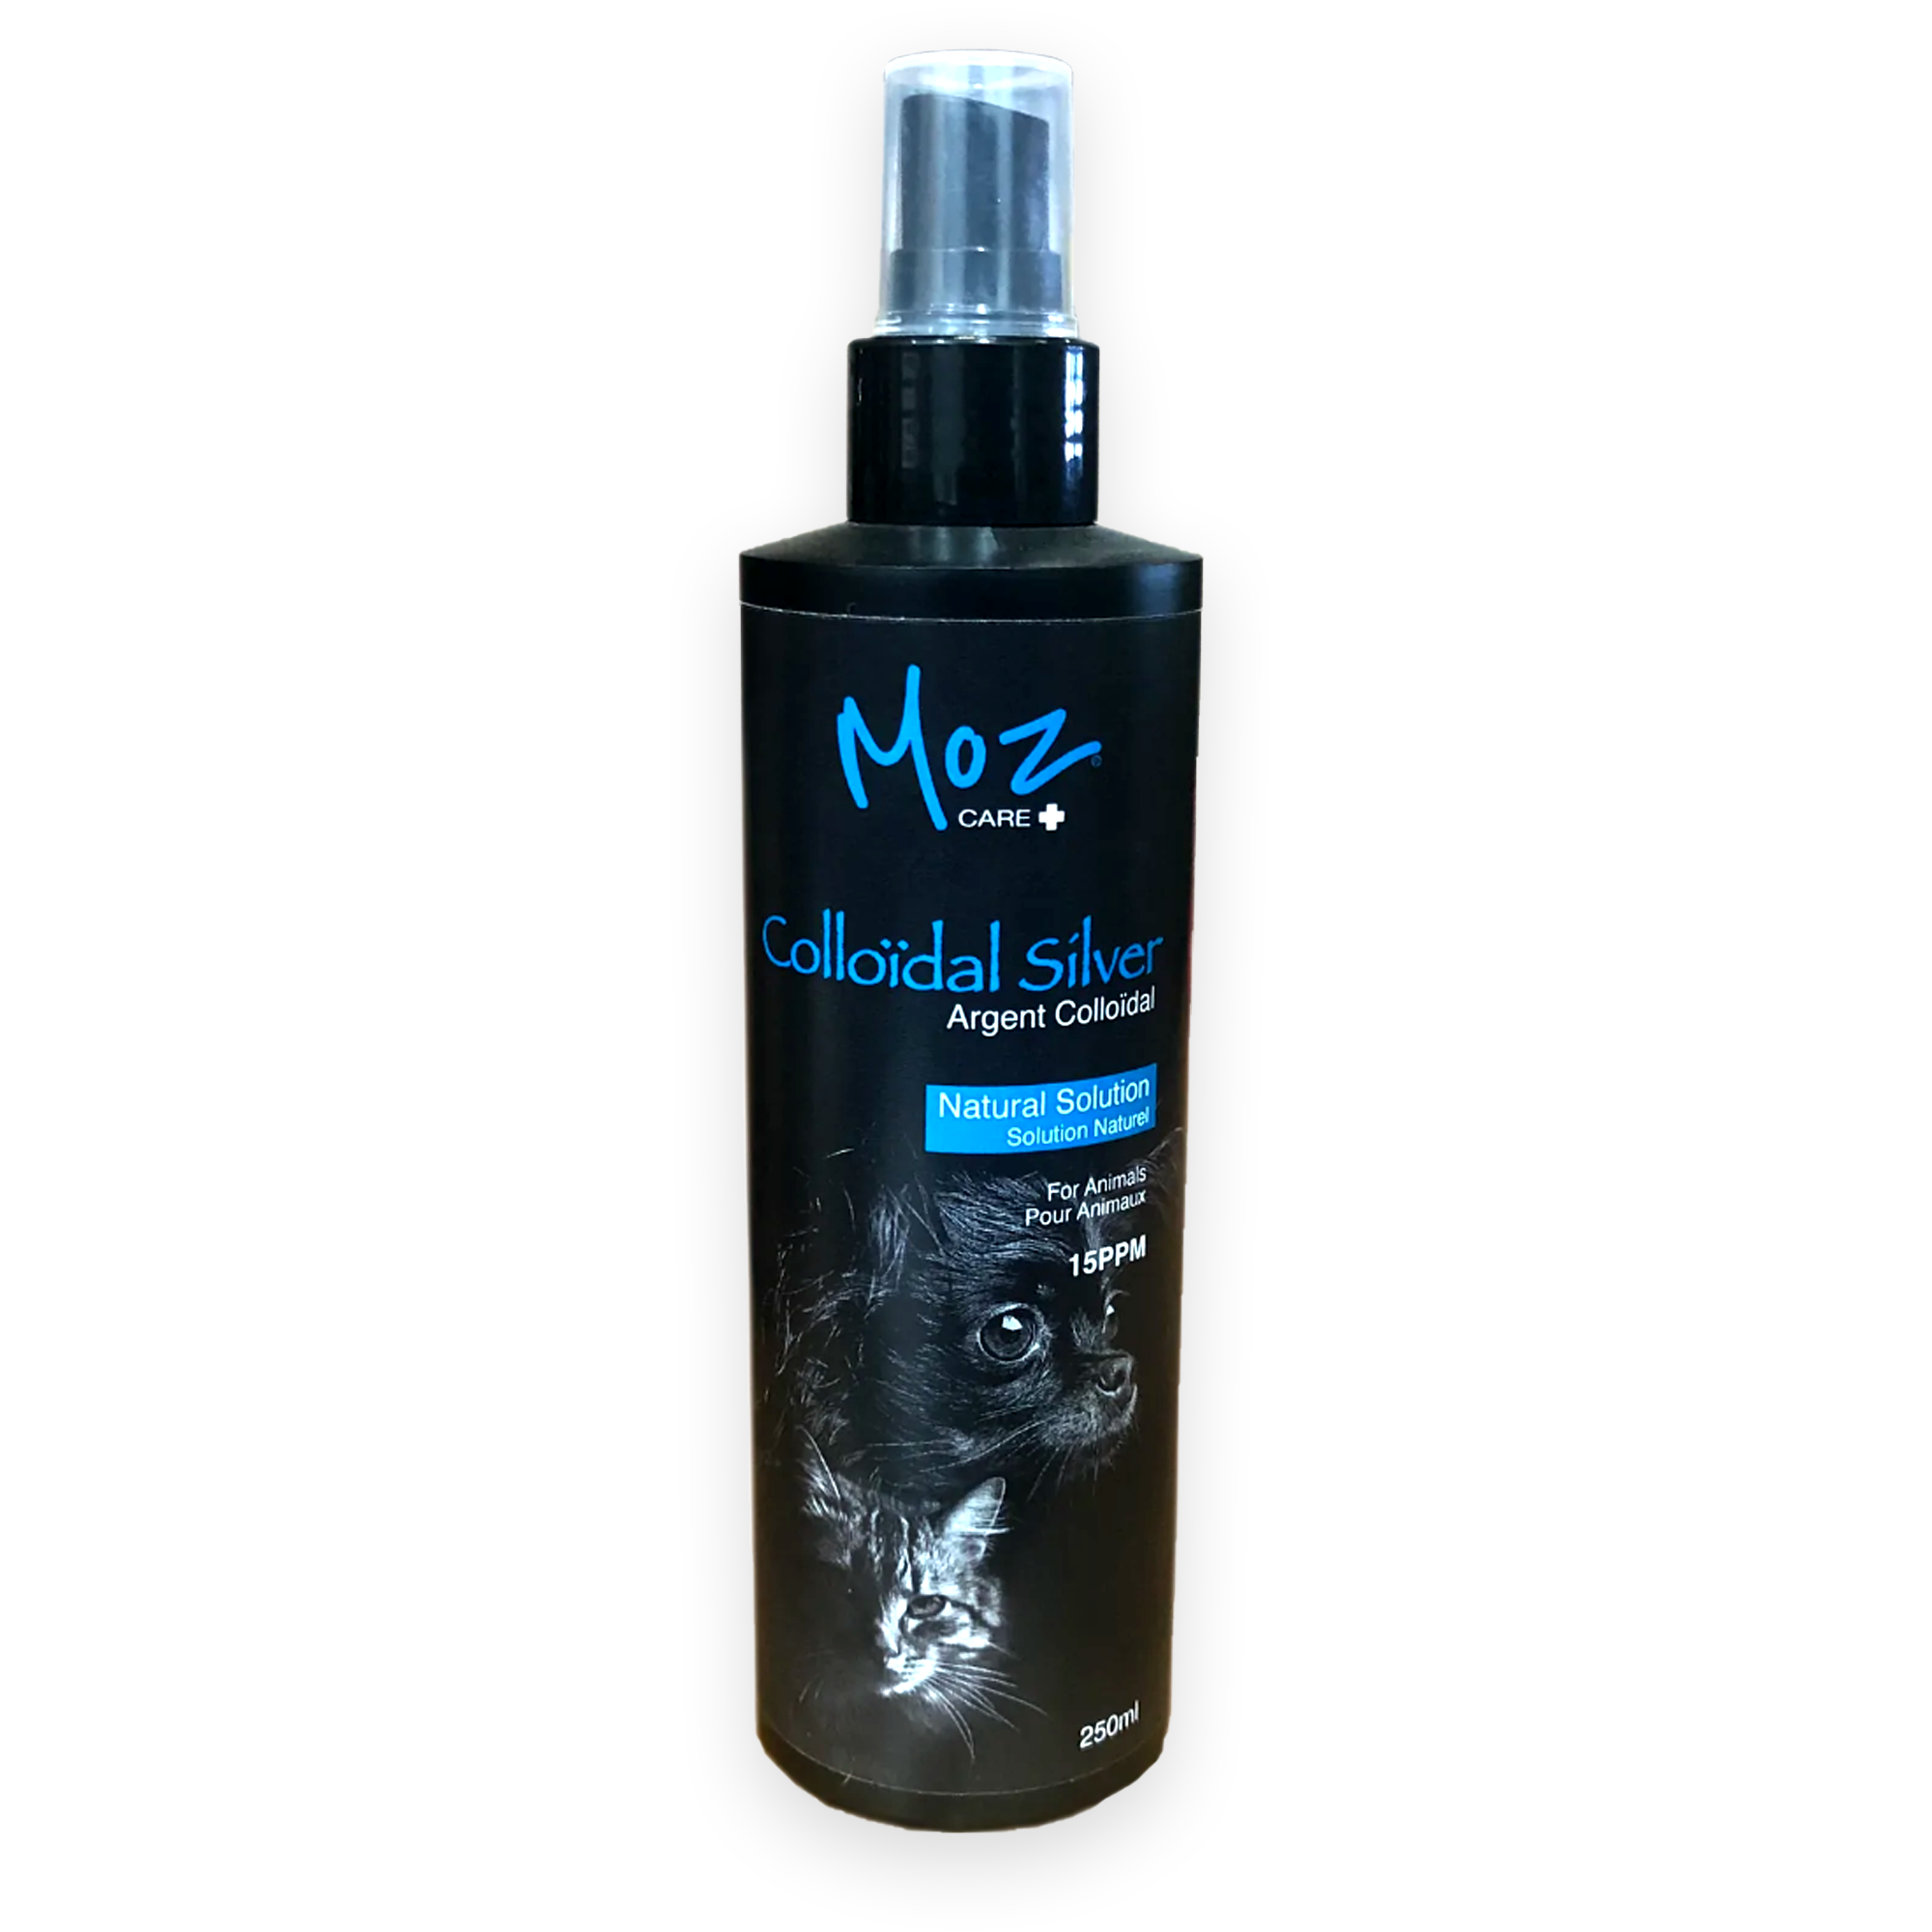 Moz Colloidal Silver Natural Solution for External Wound Healing (250ml)